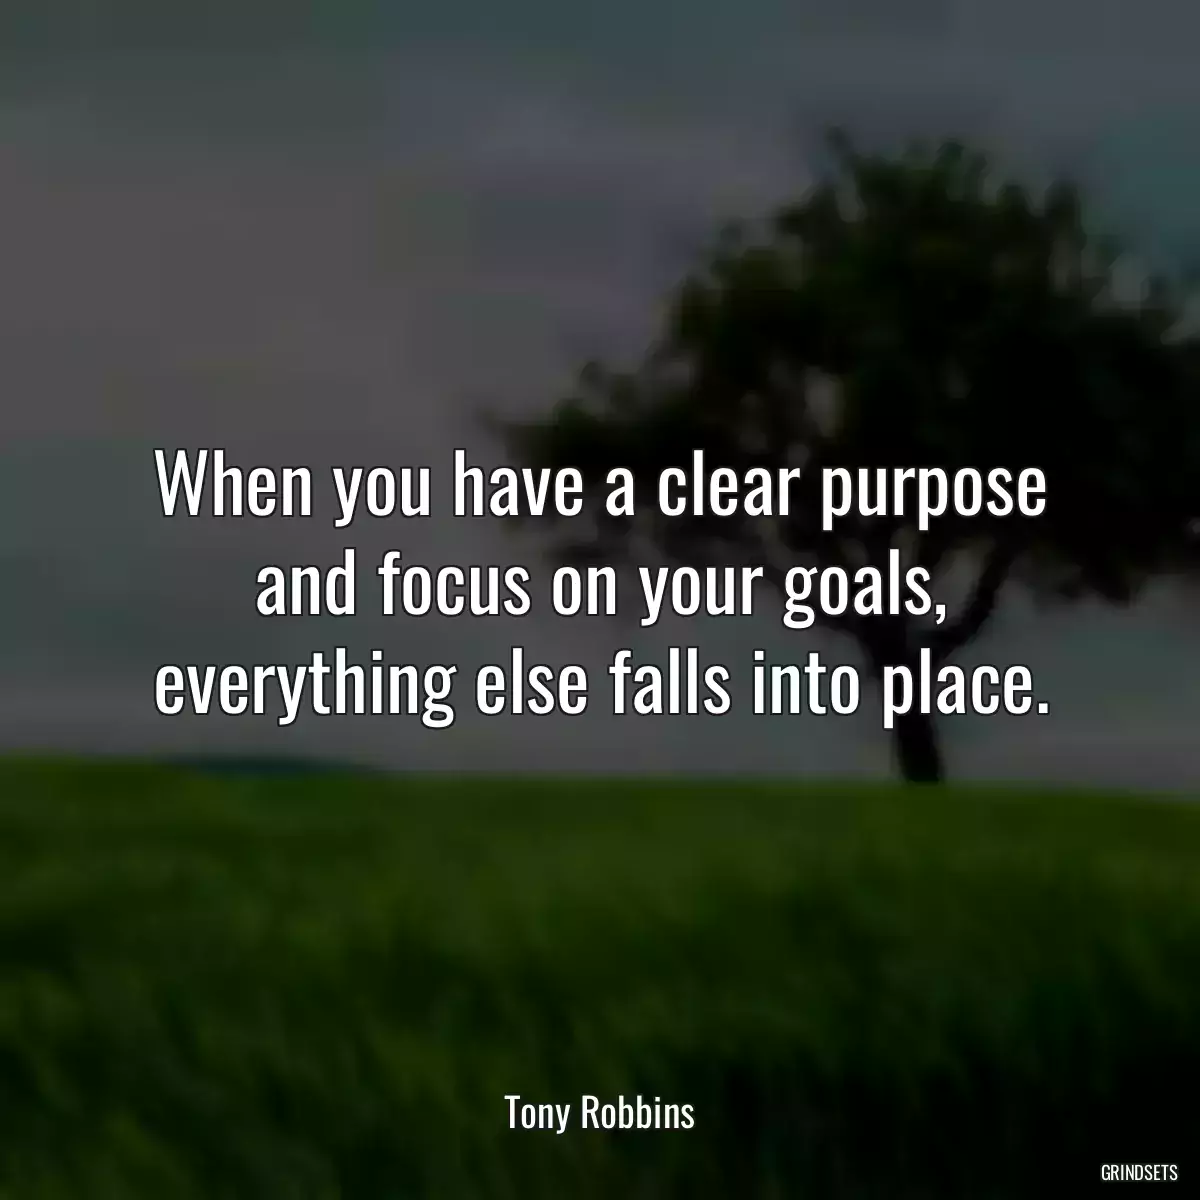 When you have a clear purpose and focus on your goals, everything else falls into place.